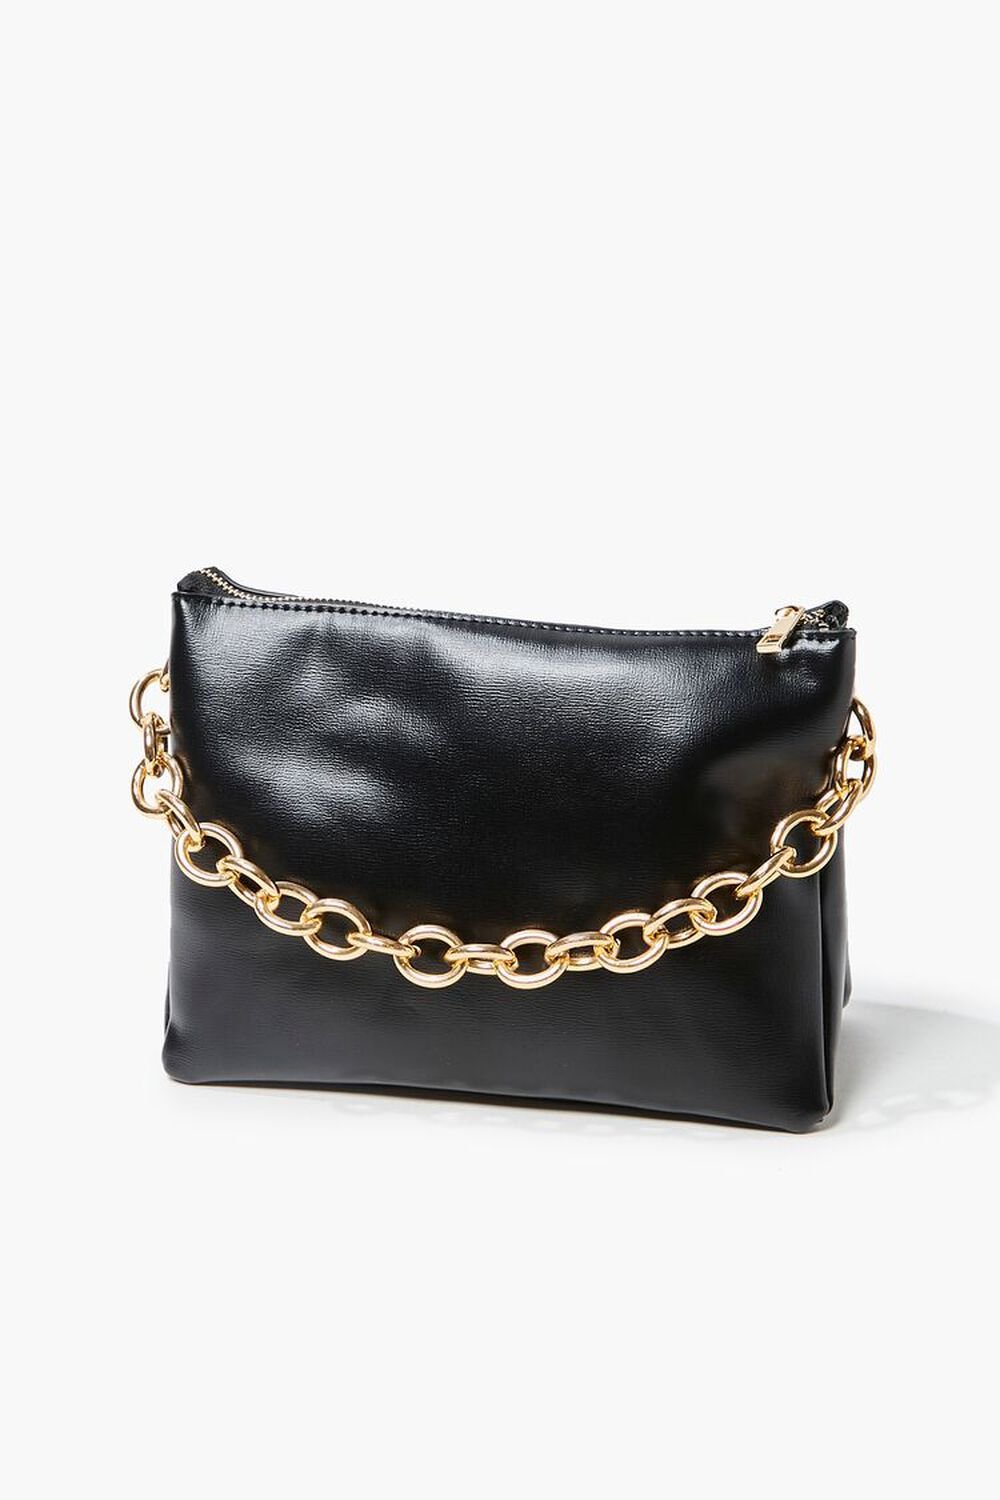 BLACK Chain Faux Leather Crossbody Bag, image 1